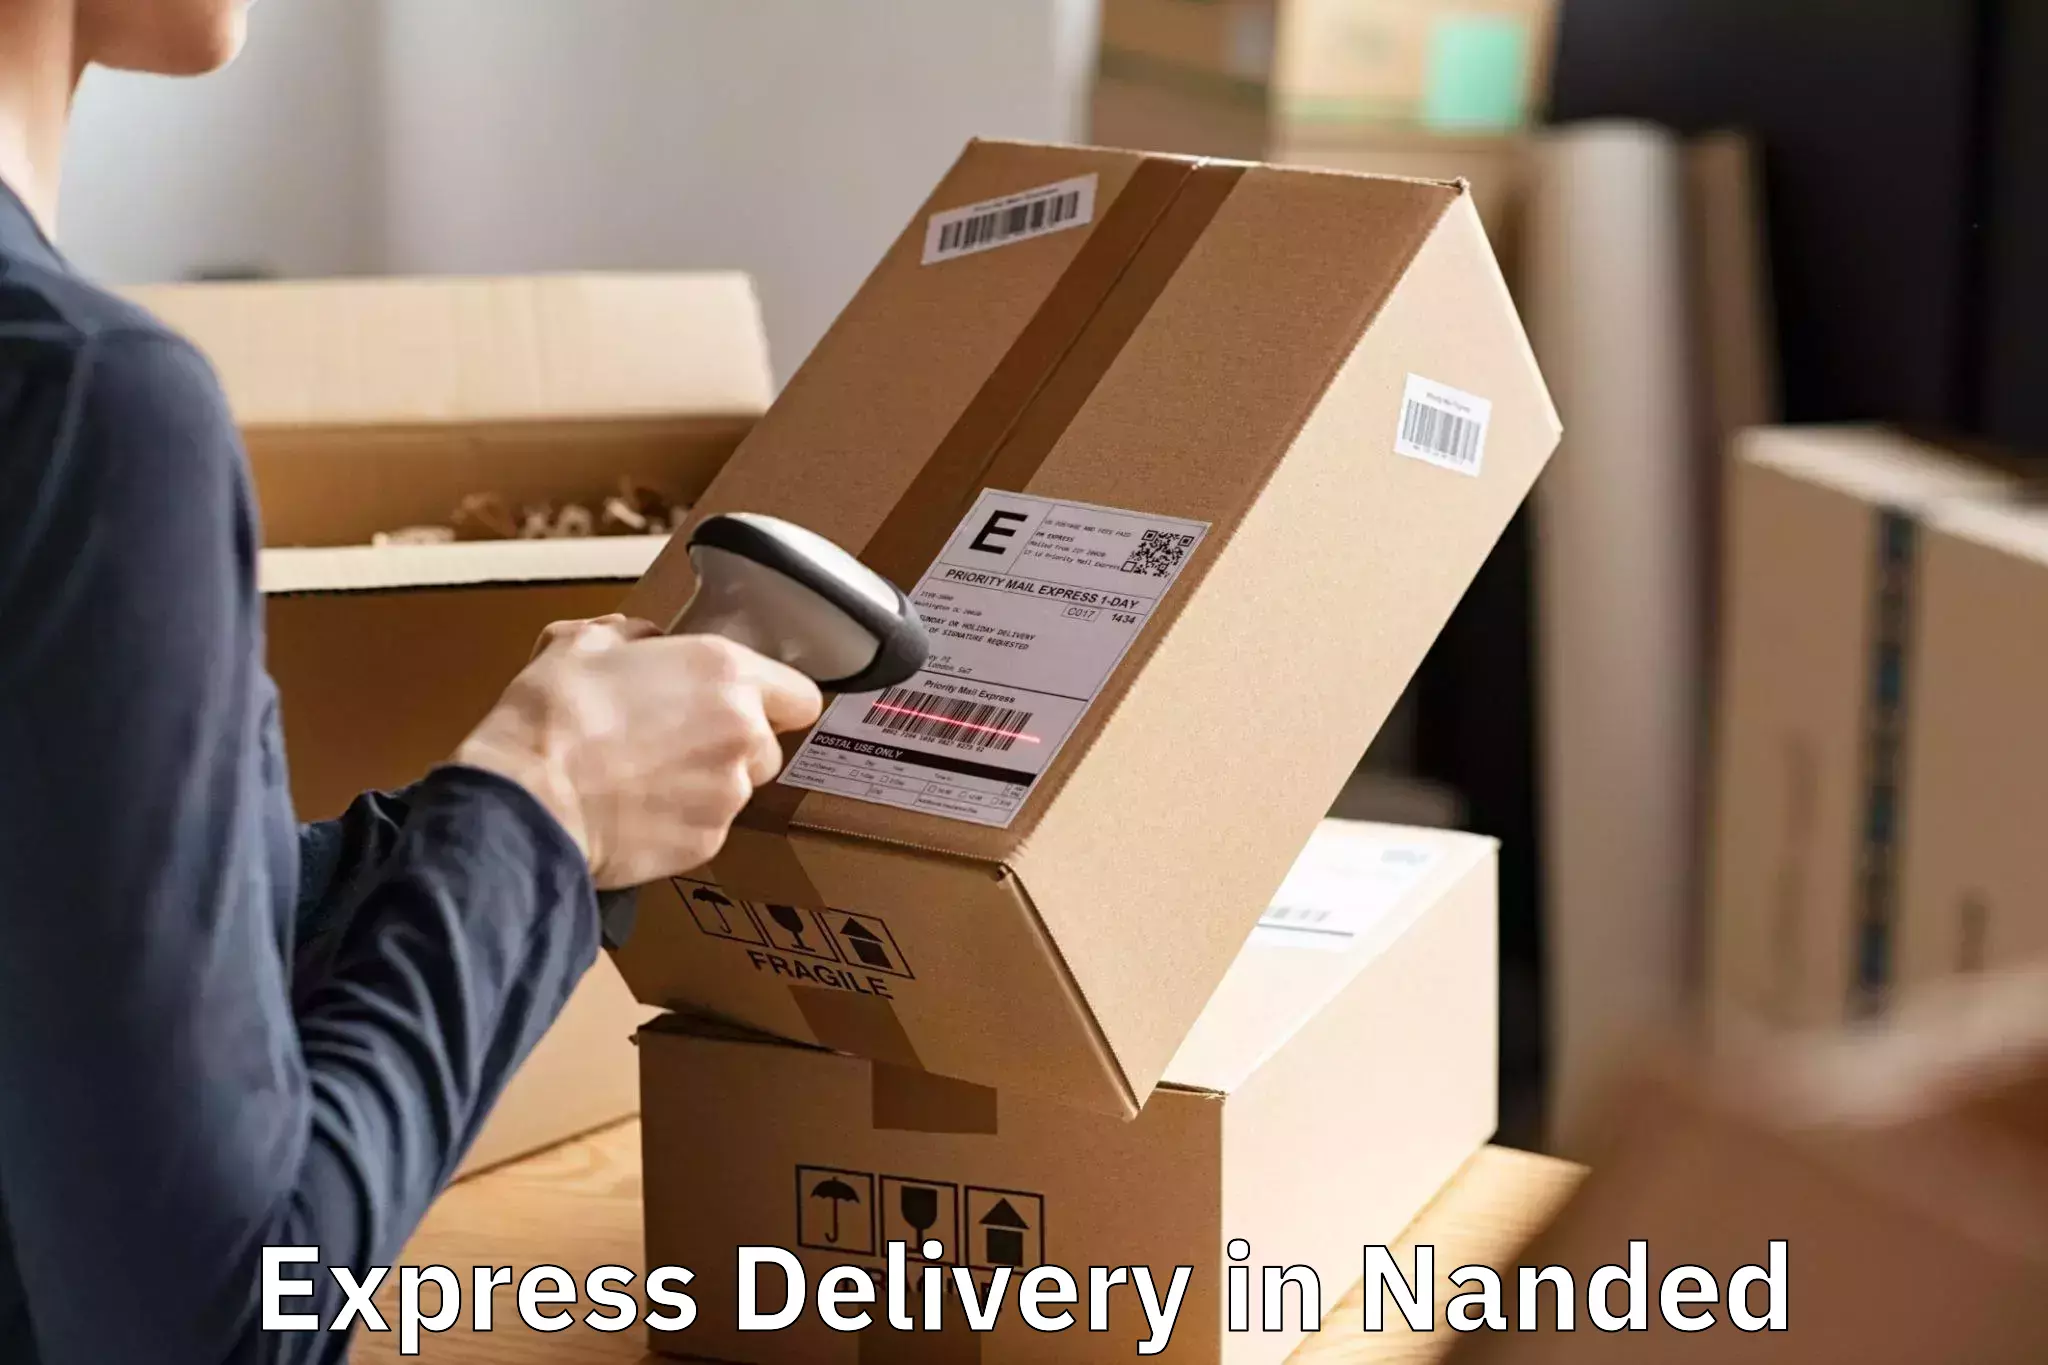 Comprehensive Express Delivery in Nanded, Maharashtra (MH)